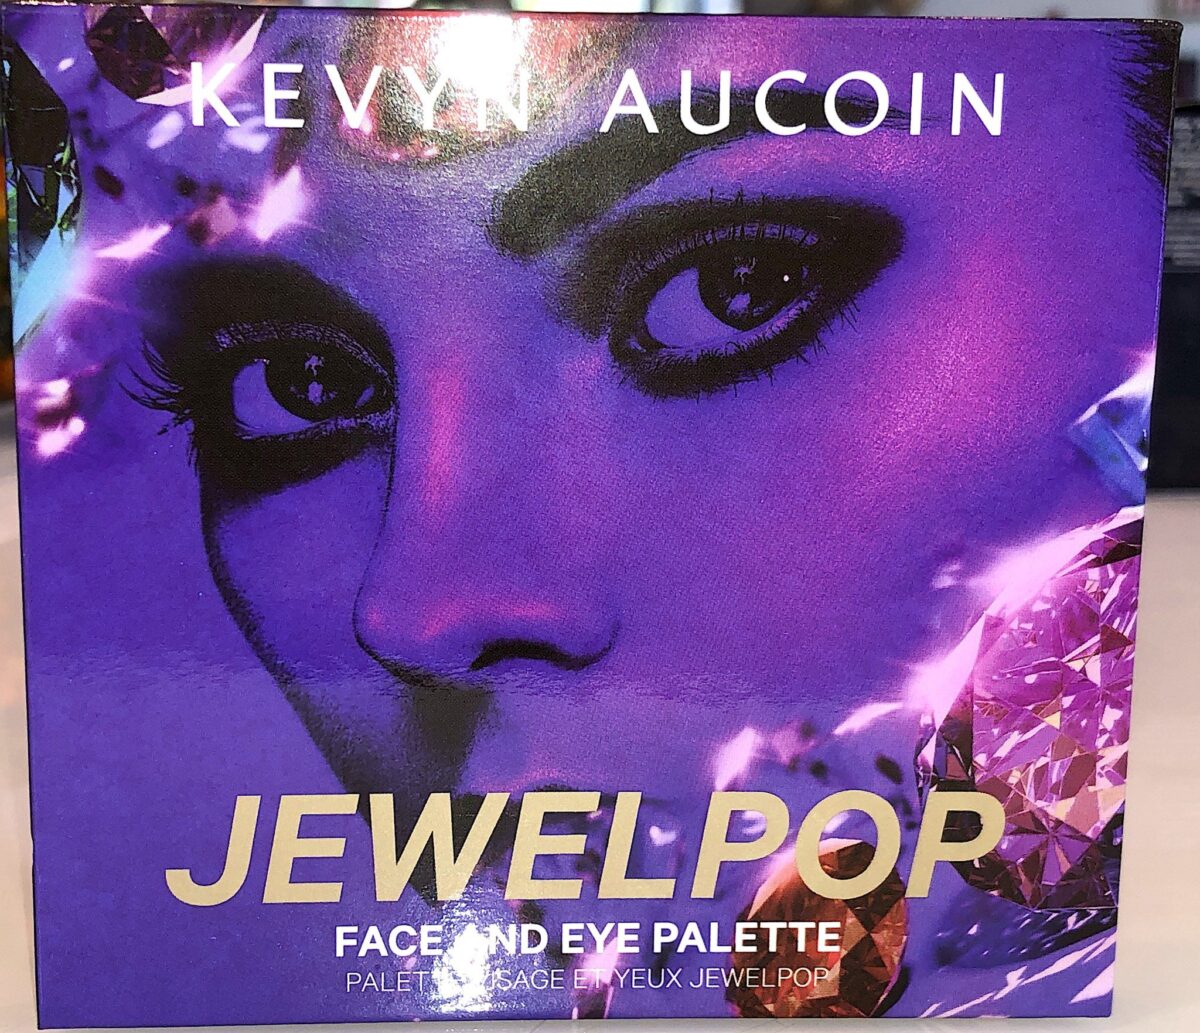 THE COMPACT/CASE FOR THE KEVYN AUCOIN JEWEL POP PALETTE